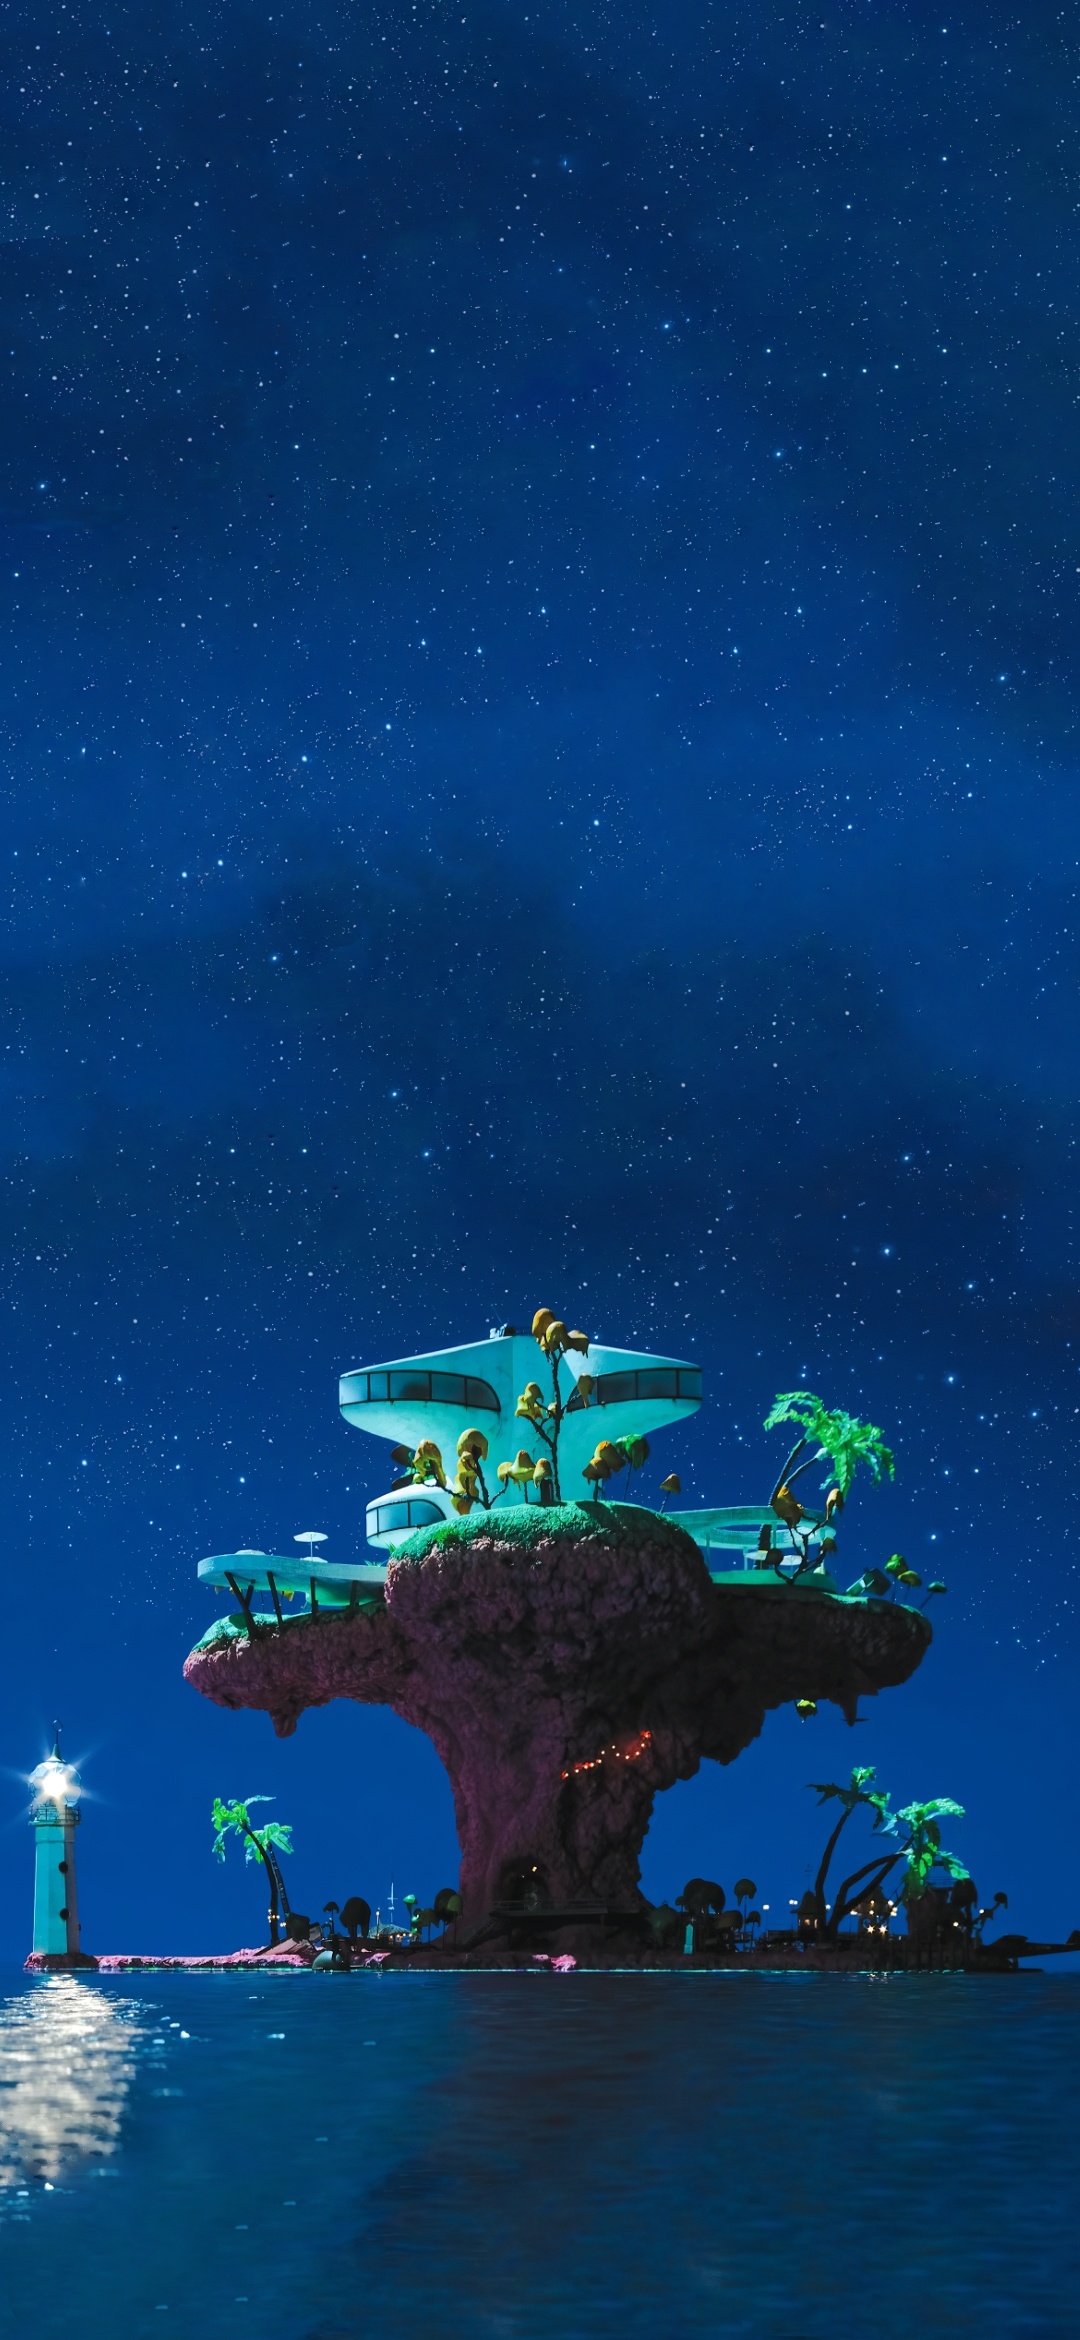 Gorillaz: Plastic Beach, The third album released in 2010, Phase 3 of the band's history. 1080x2340 HD Background.